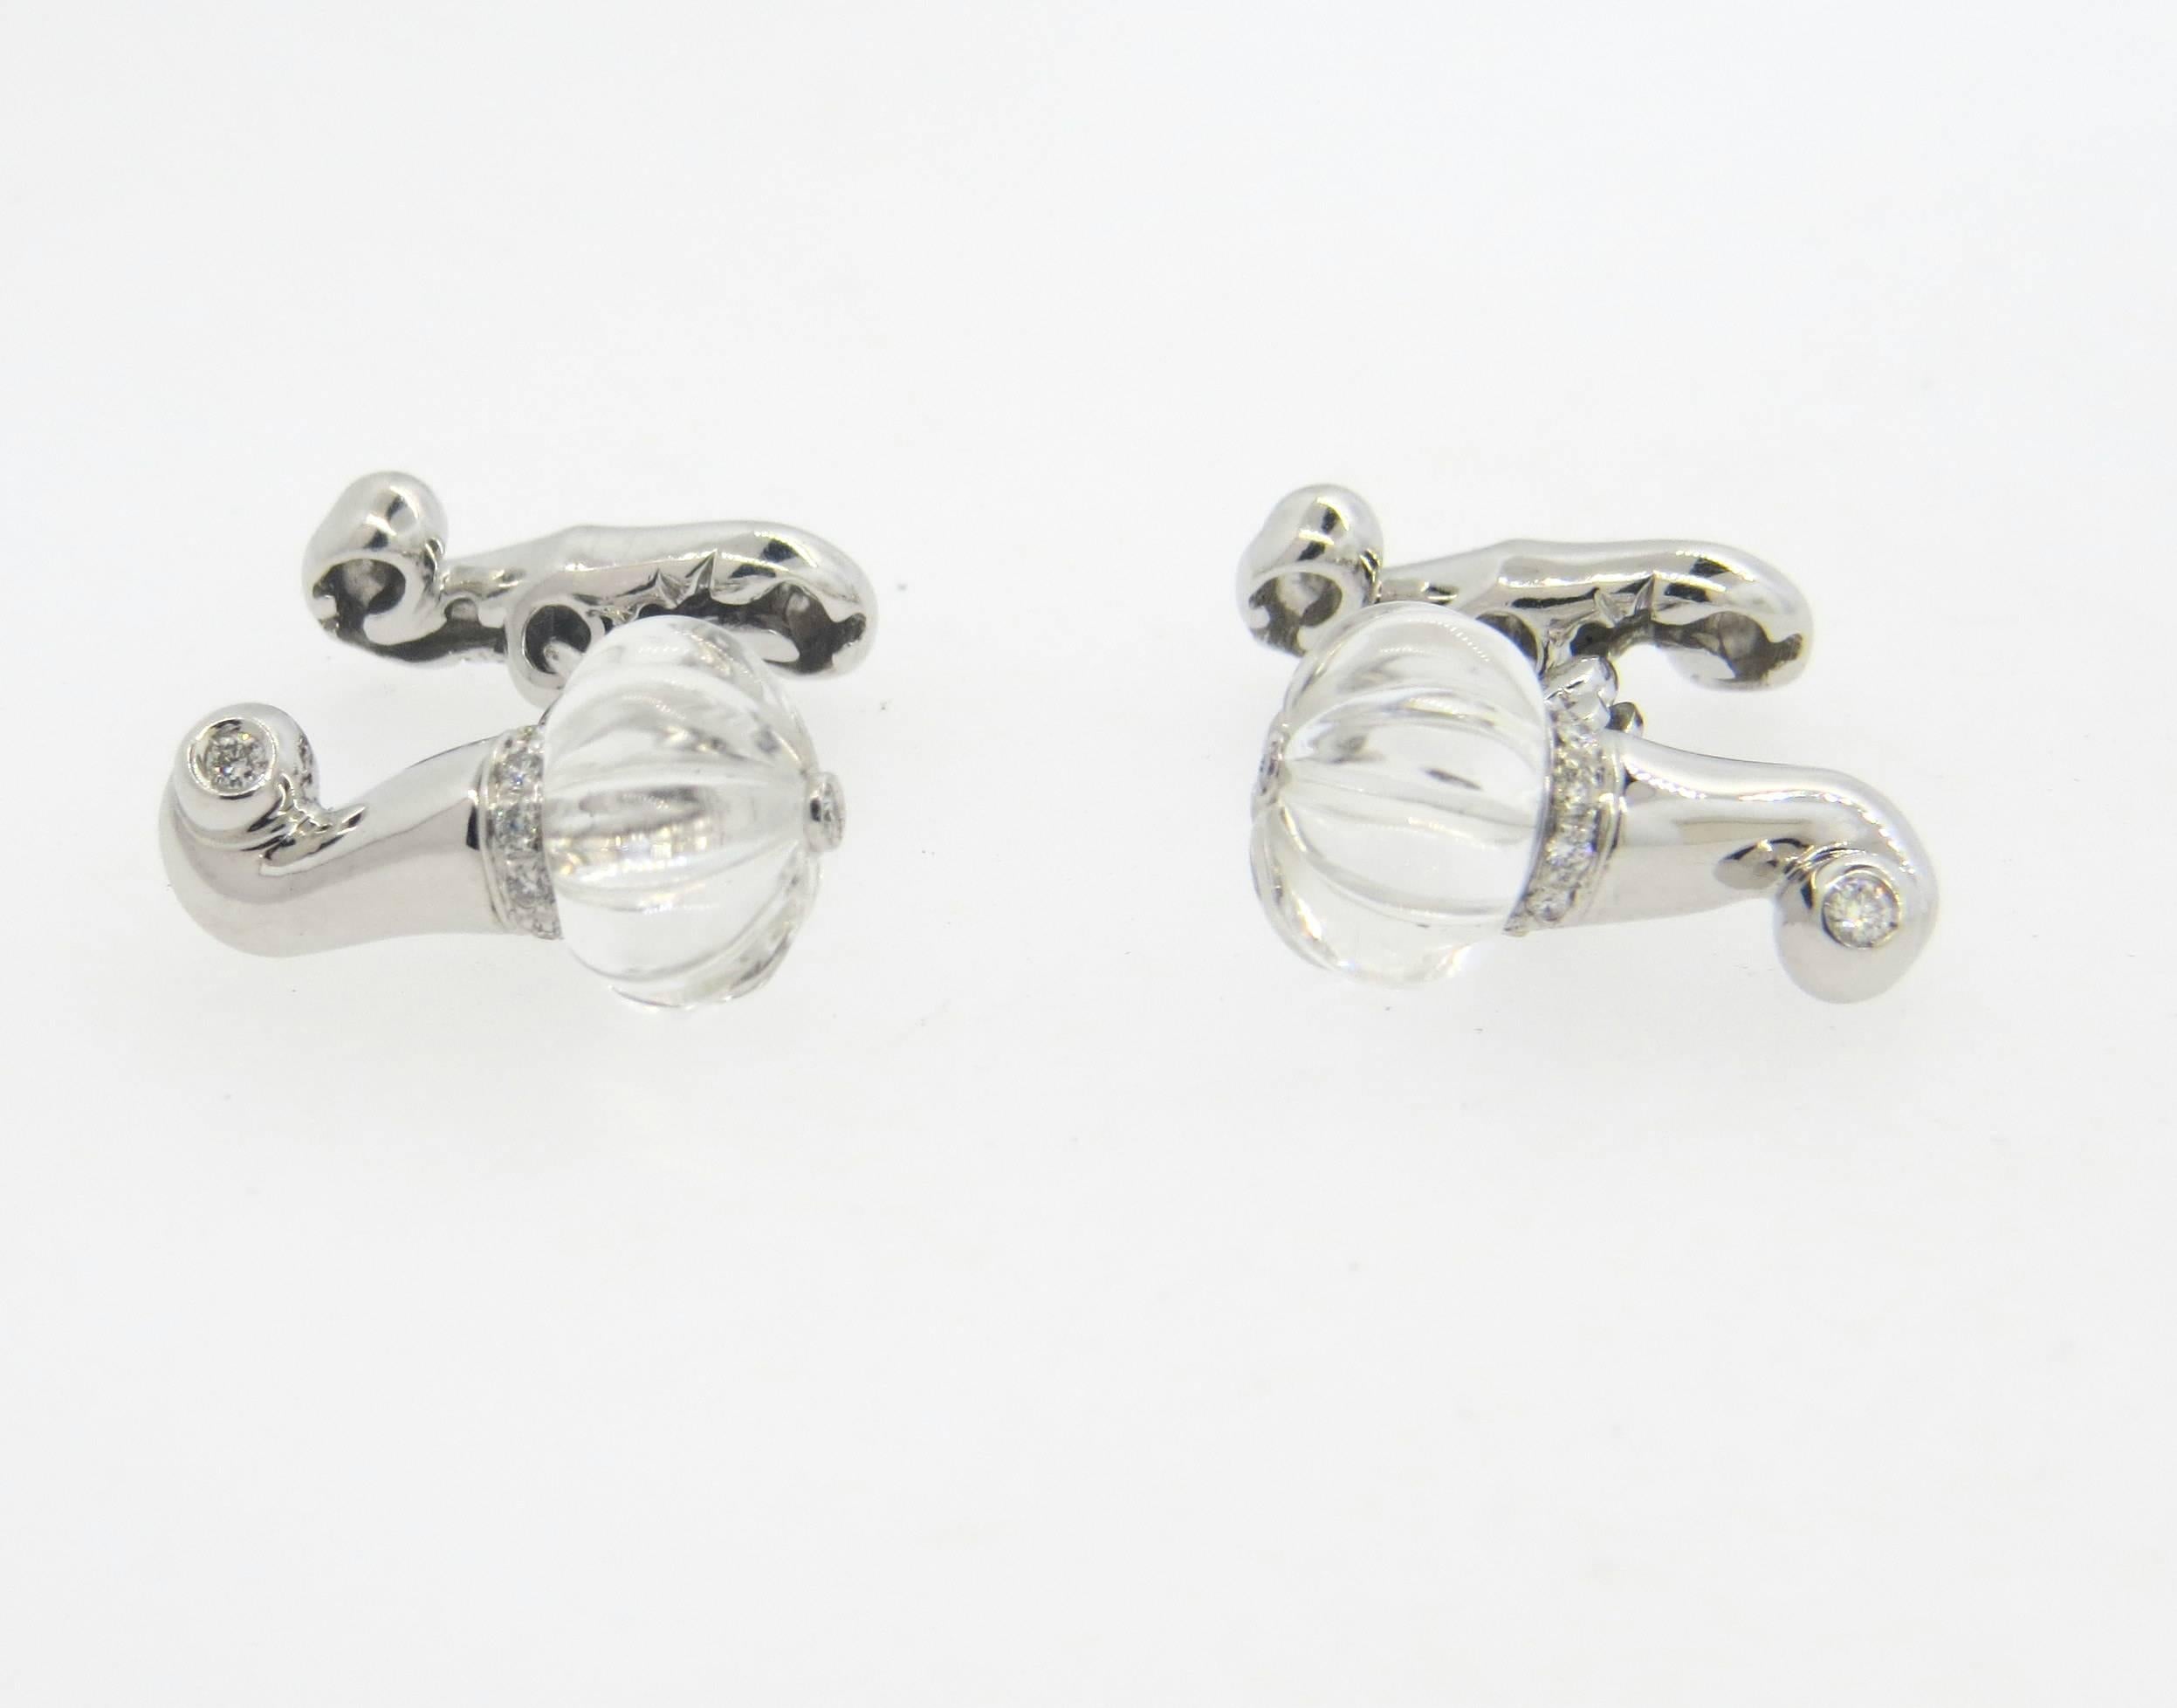 A pair of 18k white gold cufflinks, crafted by Chantecler, featuring carved crystal top, surrounded with 0.15ctw in diamonds. Cufflink top measures 17mm x 11mm, back - 15mm x 6mm. Marked: Chantecler capri, Italy, 18kt, 750, 1039NA. Weight - 9.9